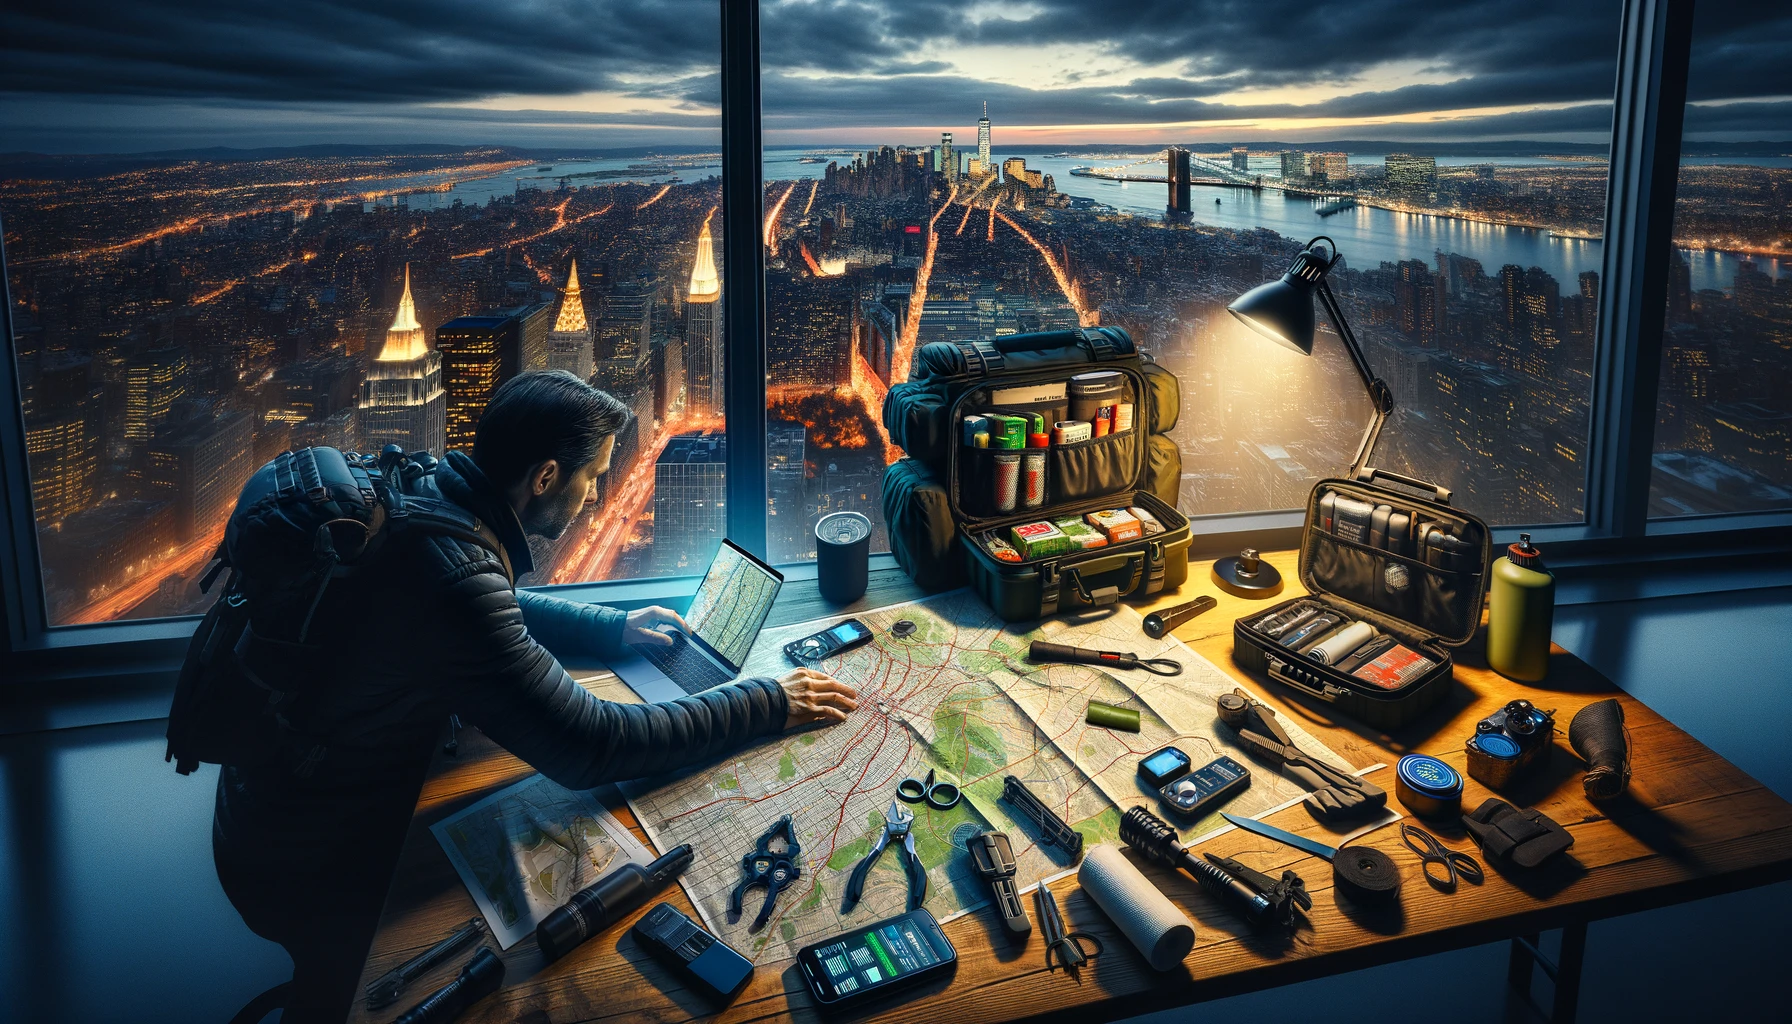 Urban prepper planning escape routes on a rooftop at dusk, with an open bug out bag showing essential gear for urban evacuation, emphasizing strategic planning and preparedness against a city backdrop